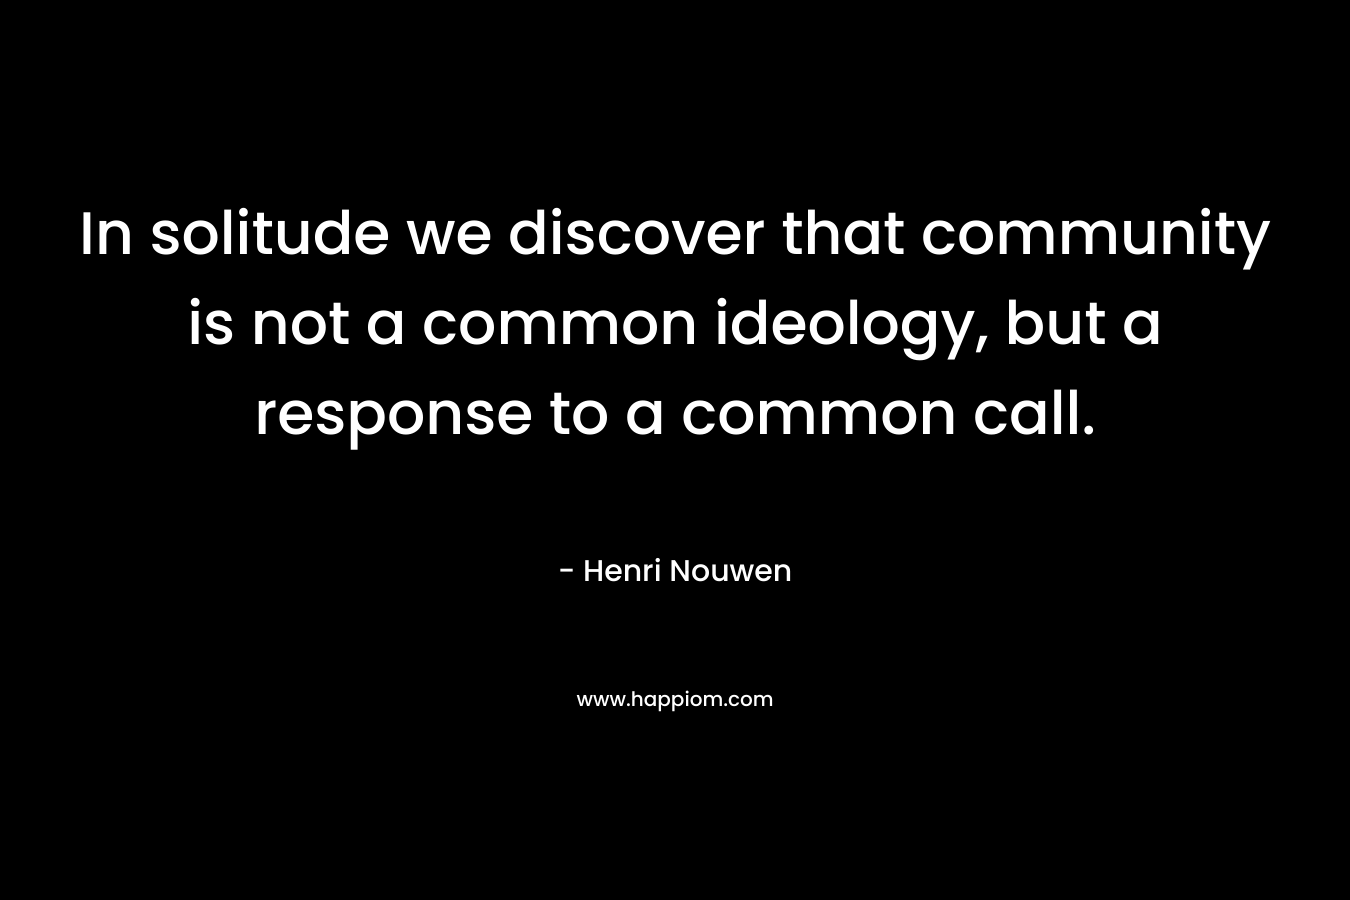 In solitude we discover that community is not a common ideology, but a response to a common call. – Henri Nouwen